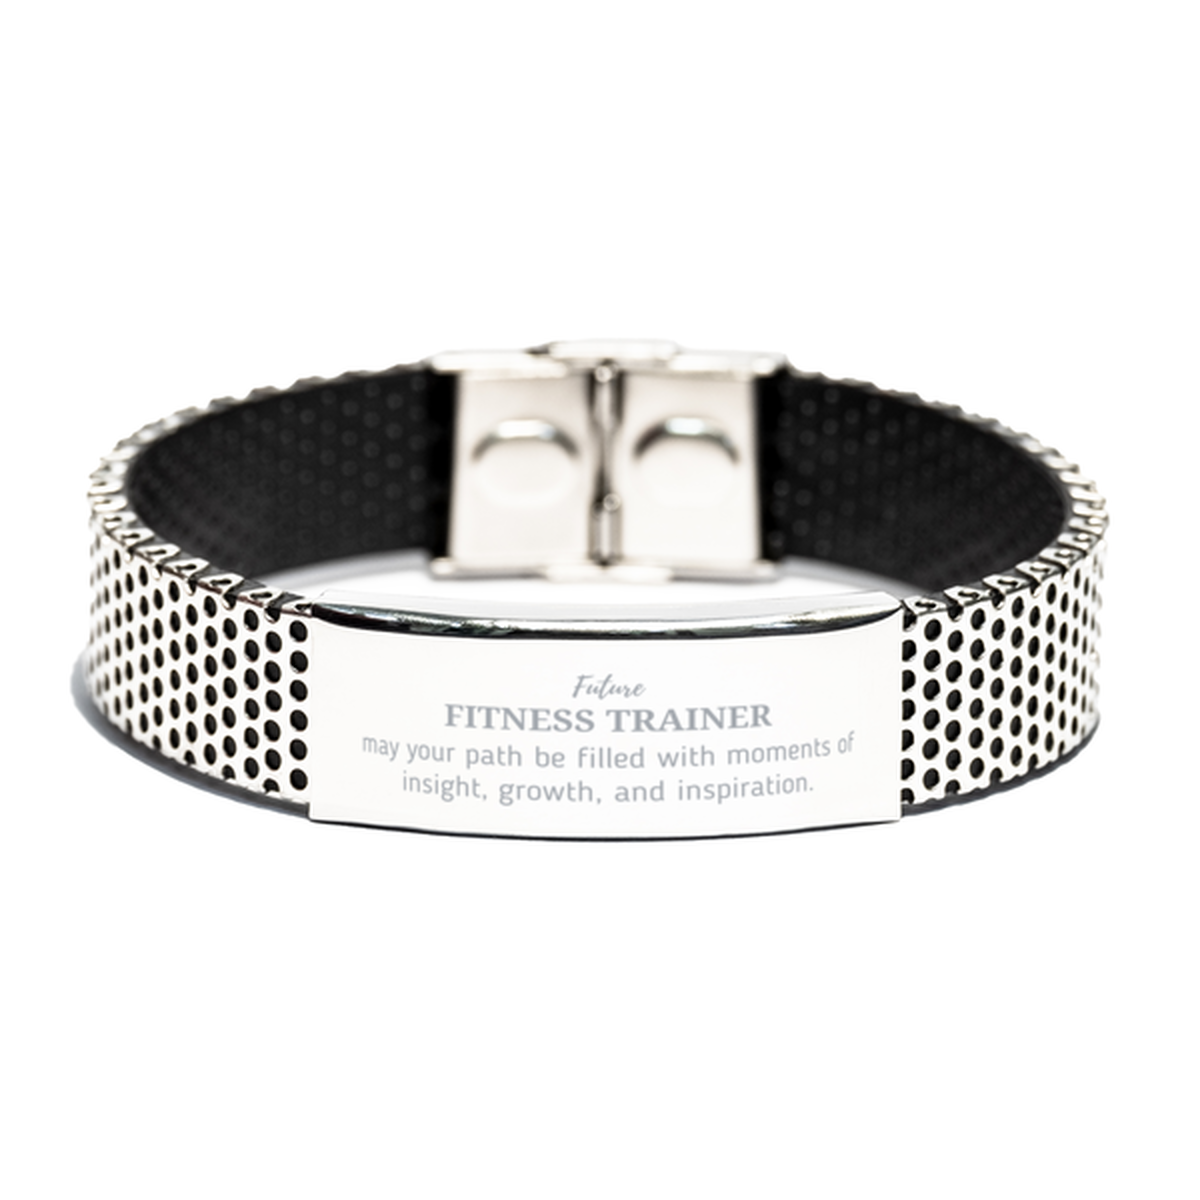 Future Fitness Trainer Gifts, May your path be filled with moments of insight, Graduation Gifts for New Fitness Trainer, Christmas Unique Stainless Steel Bracelet For Men, Women, Friends